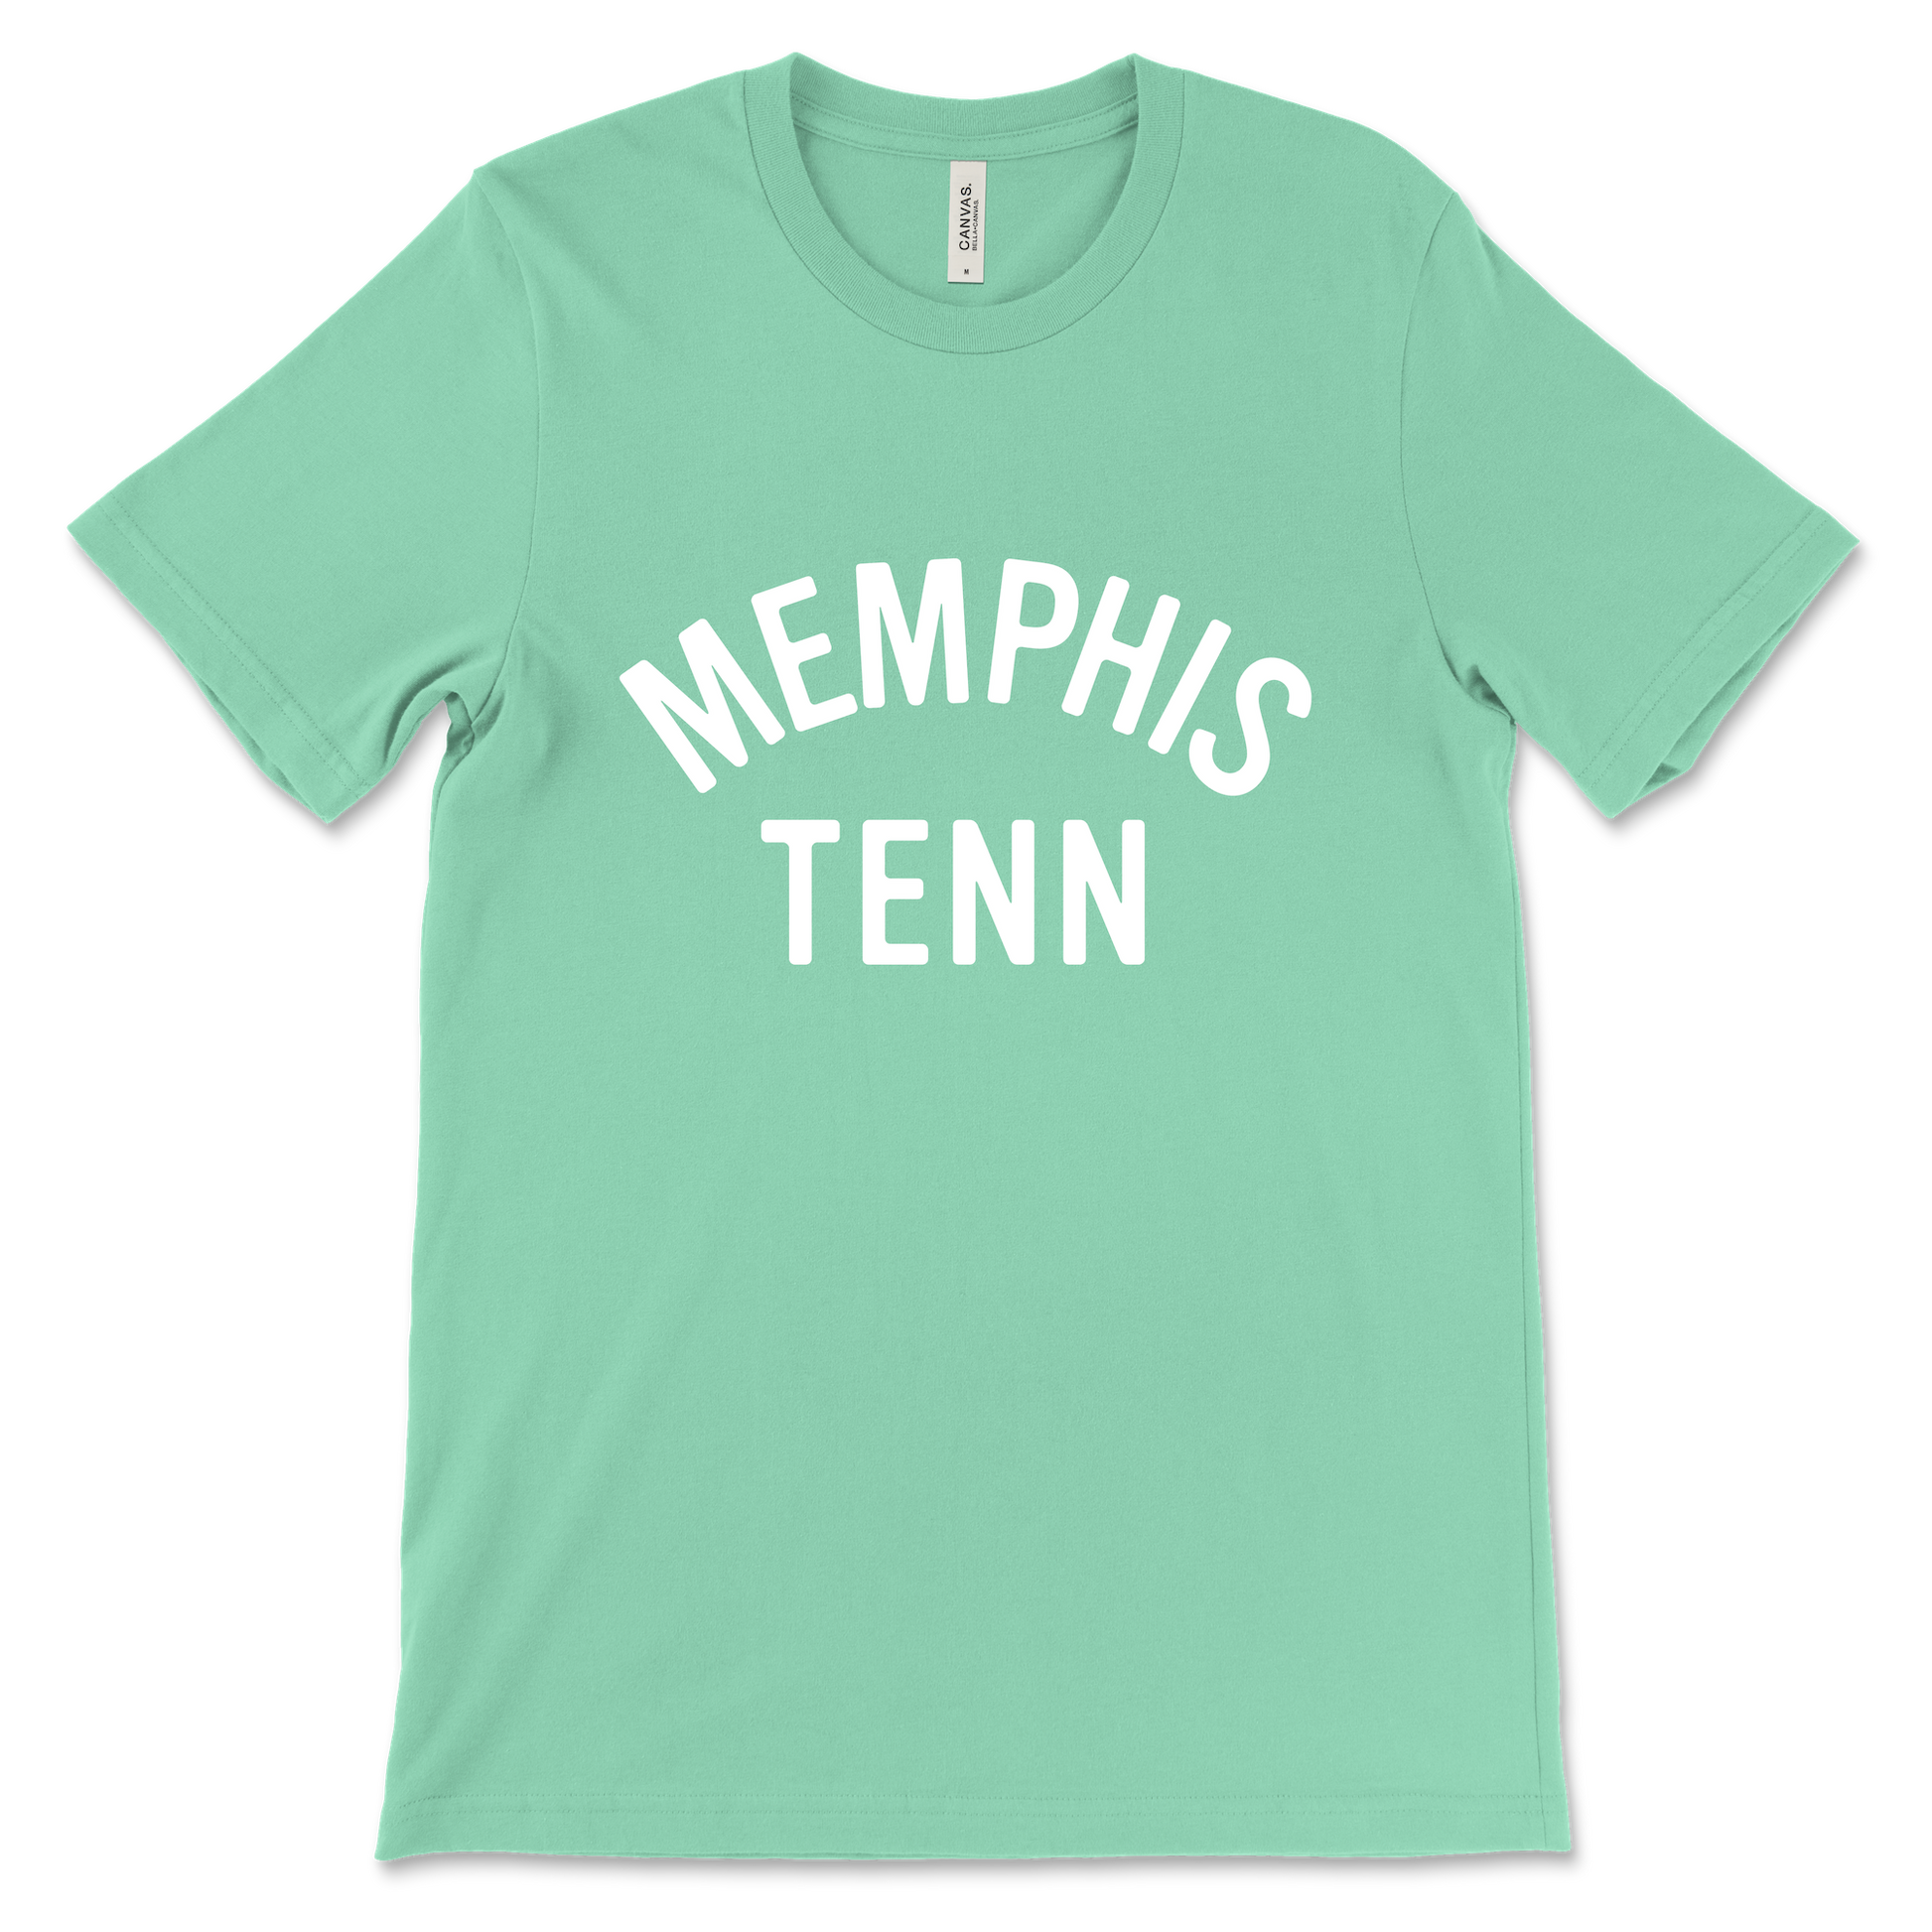 A mint green MEMPHIS TENN TEE with the words "Choose901" printed in white block letters across the chest.